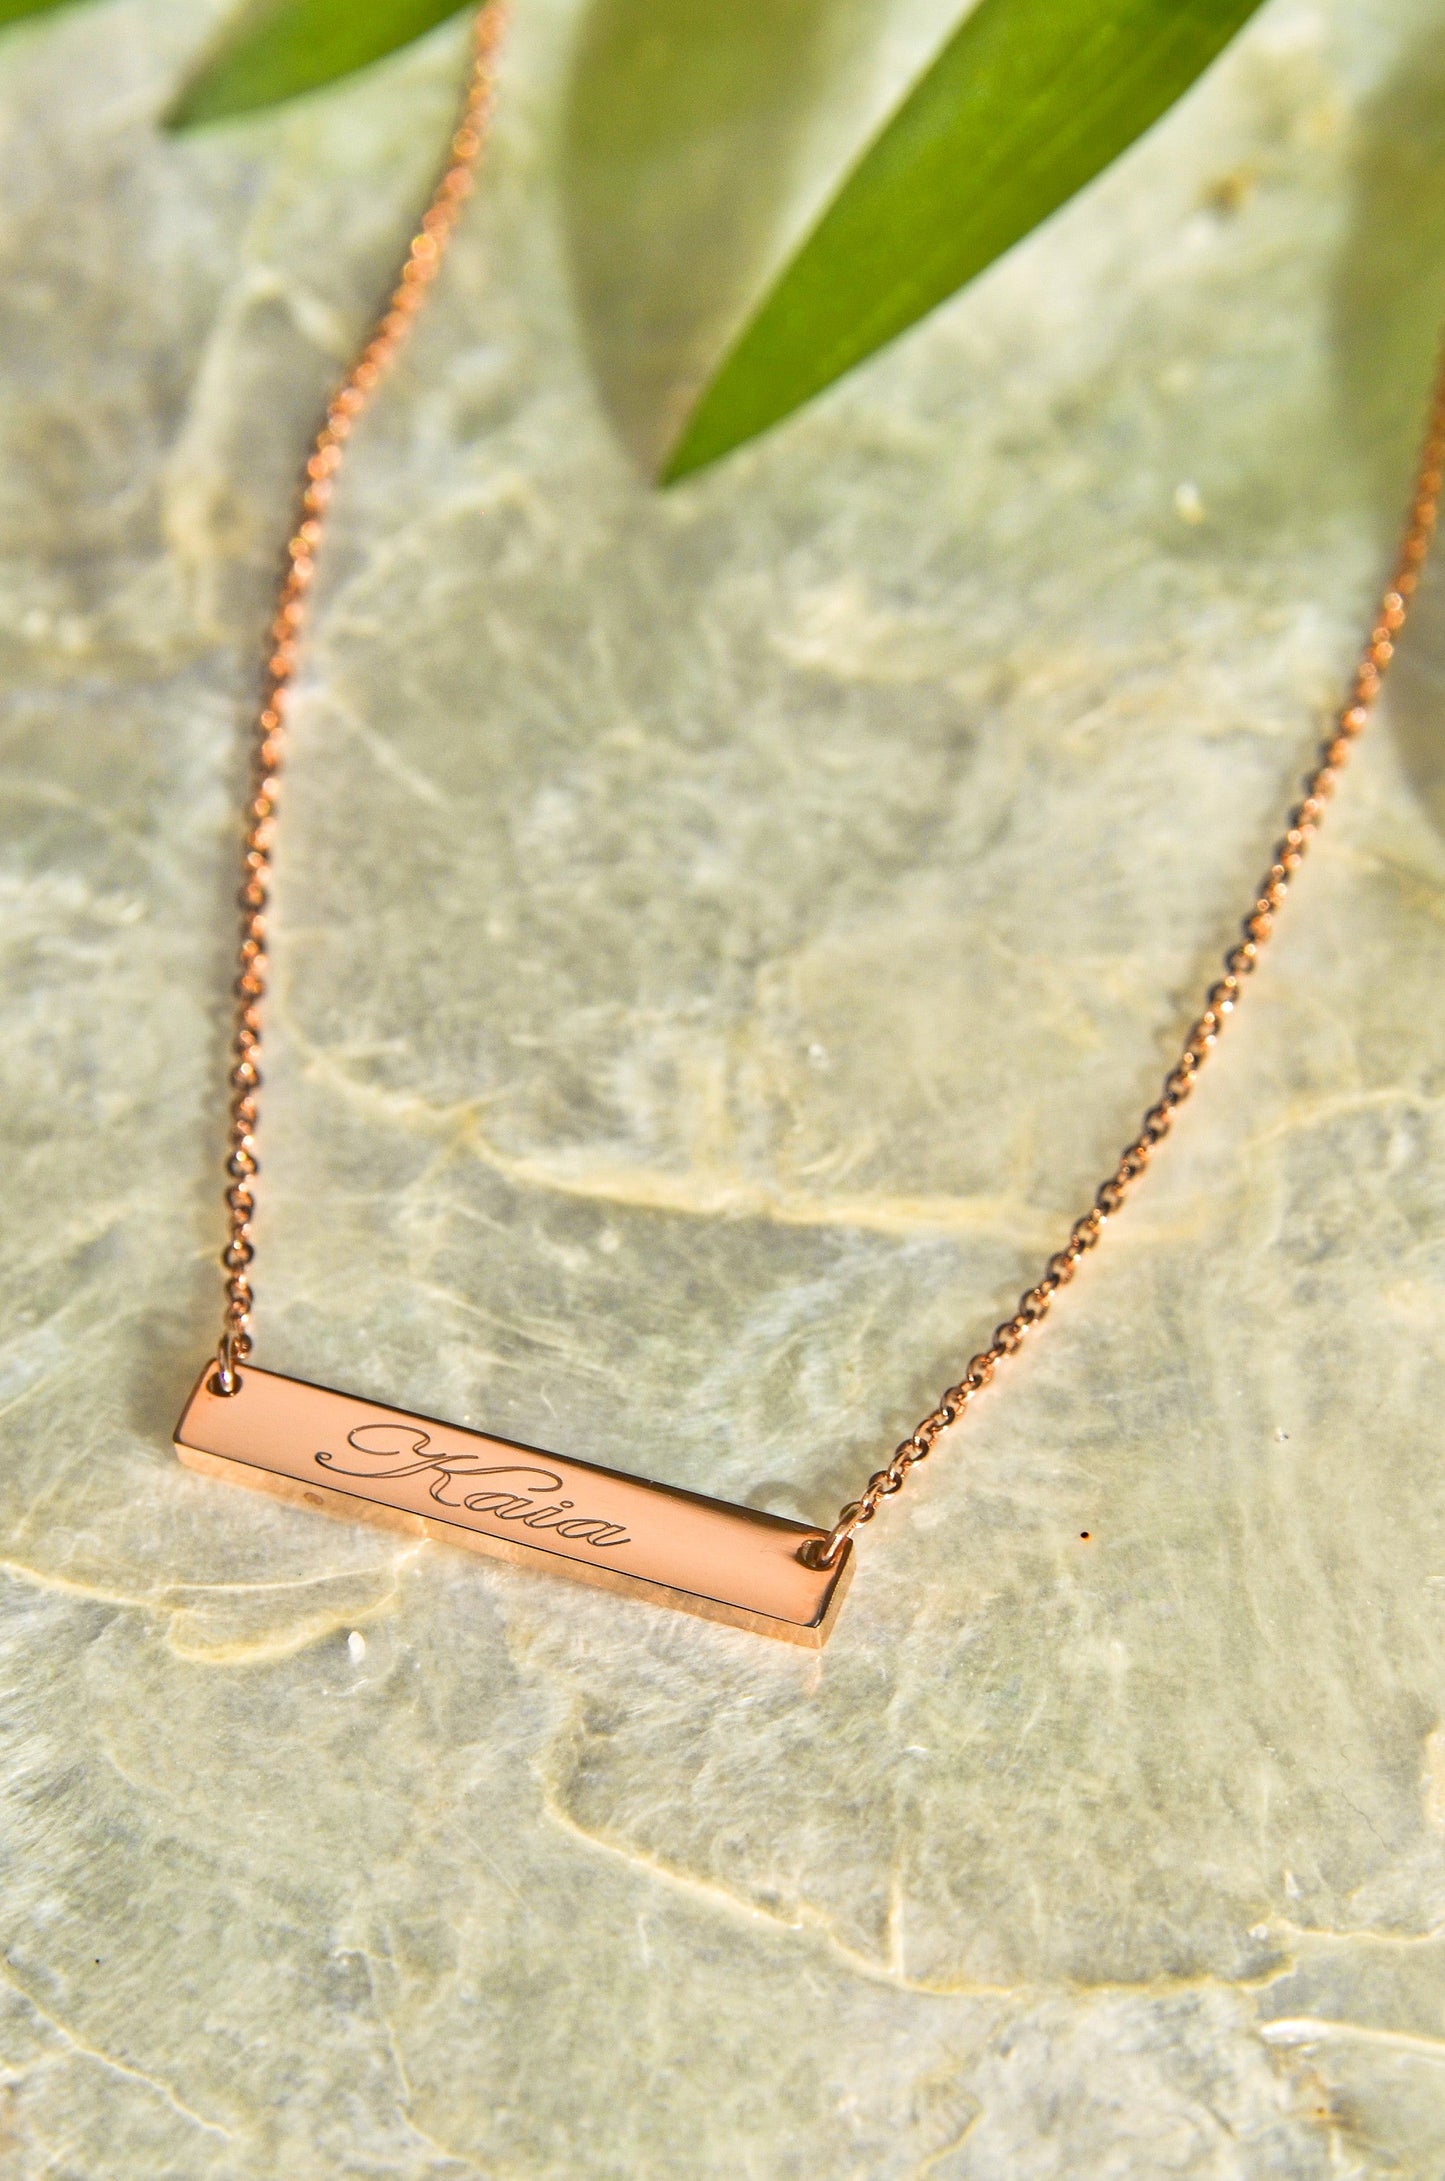 CUSTOM ENGRAVED NECKLACE